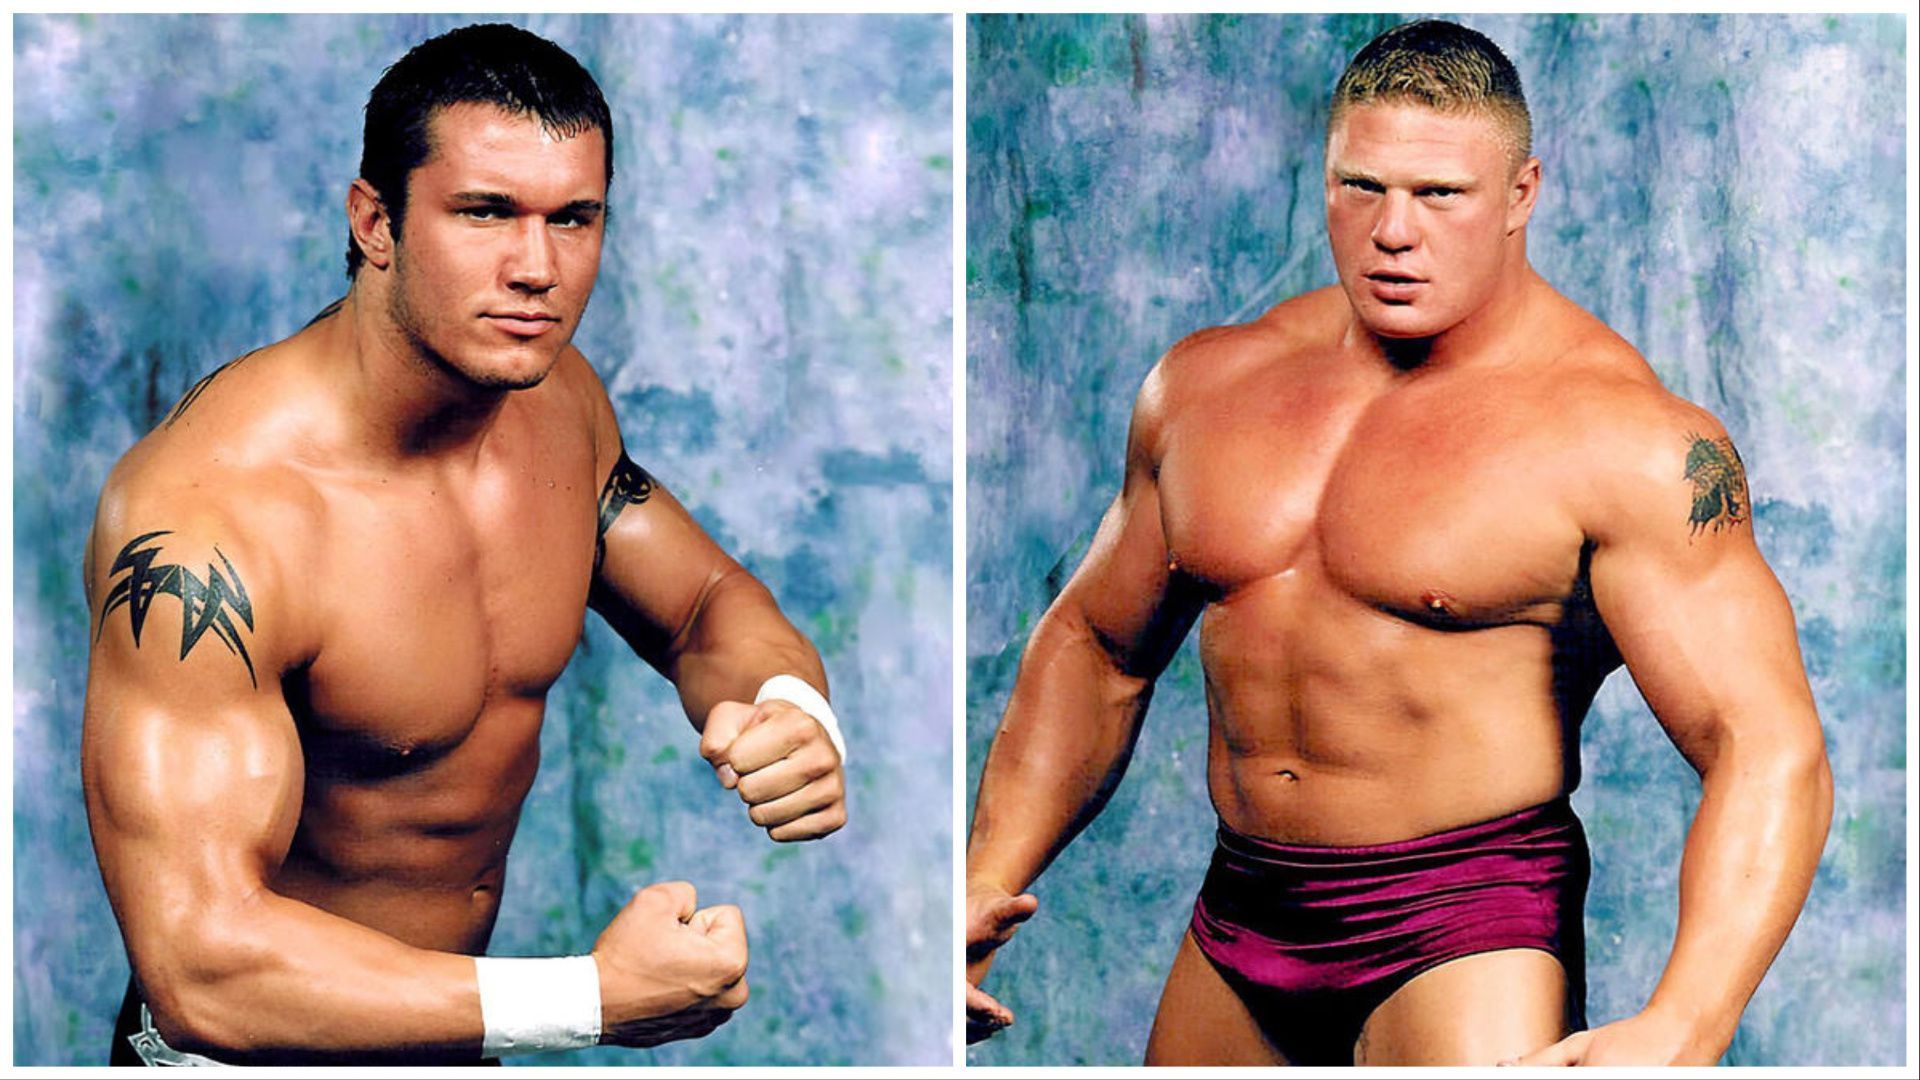 Randy Orton and Brock Lesnar in OVW